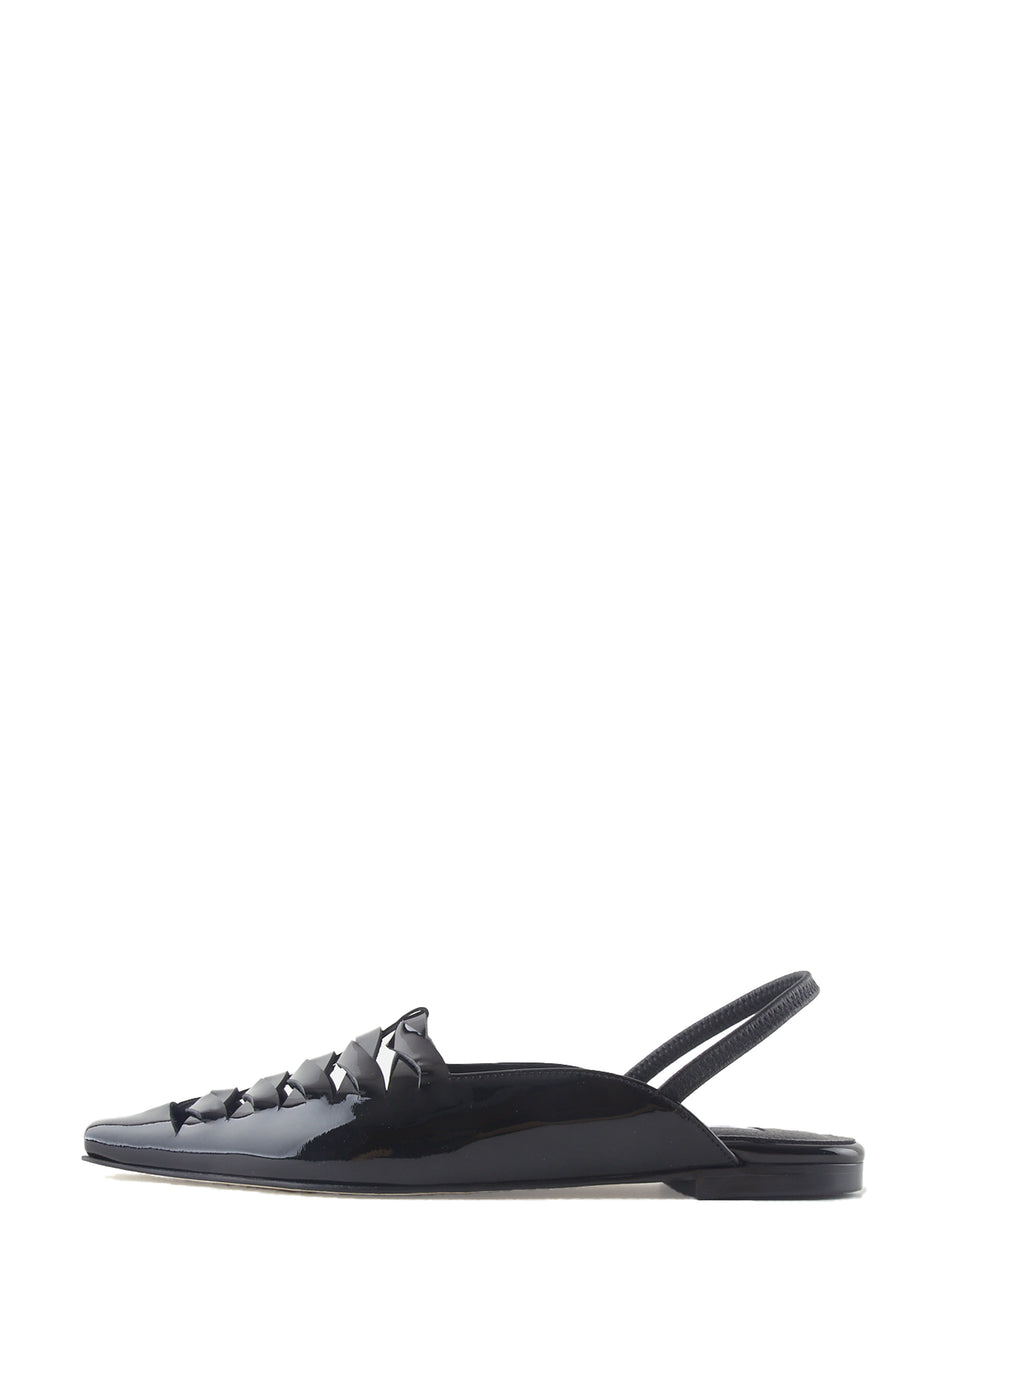 Annecy2_Balck | Best-Selling Slingback Sandals: Handcrafted Italian ...